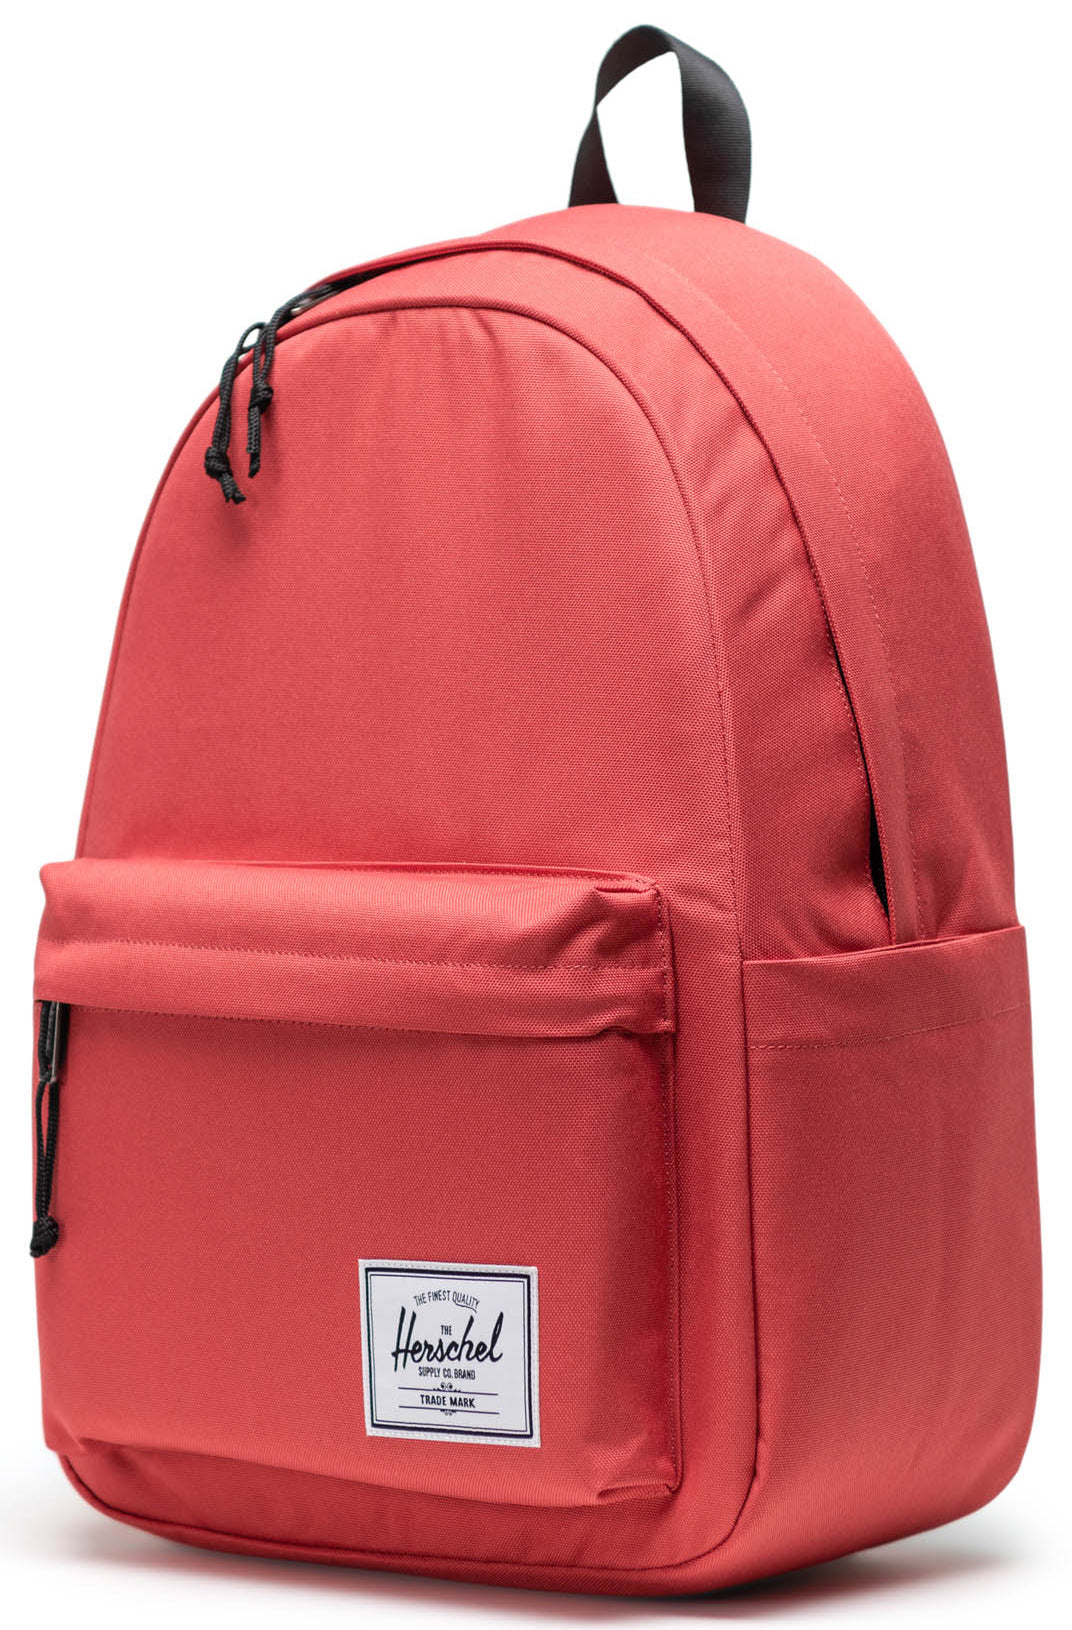 Herschel Classic X-Large Backpack - Mineral Rose